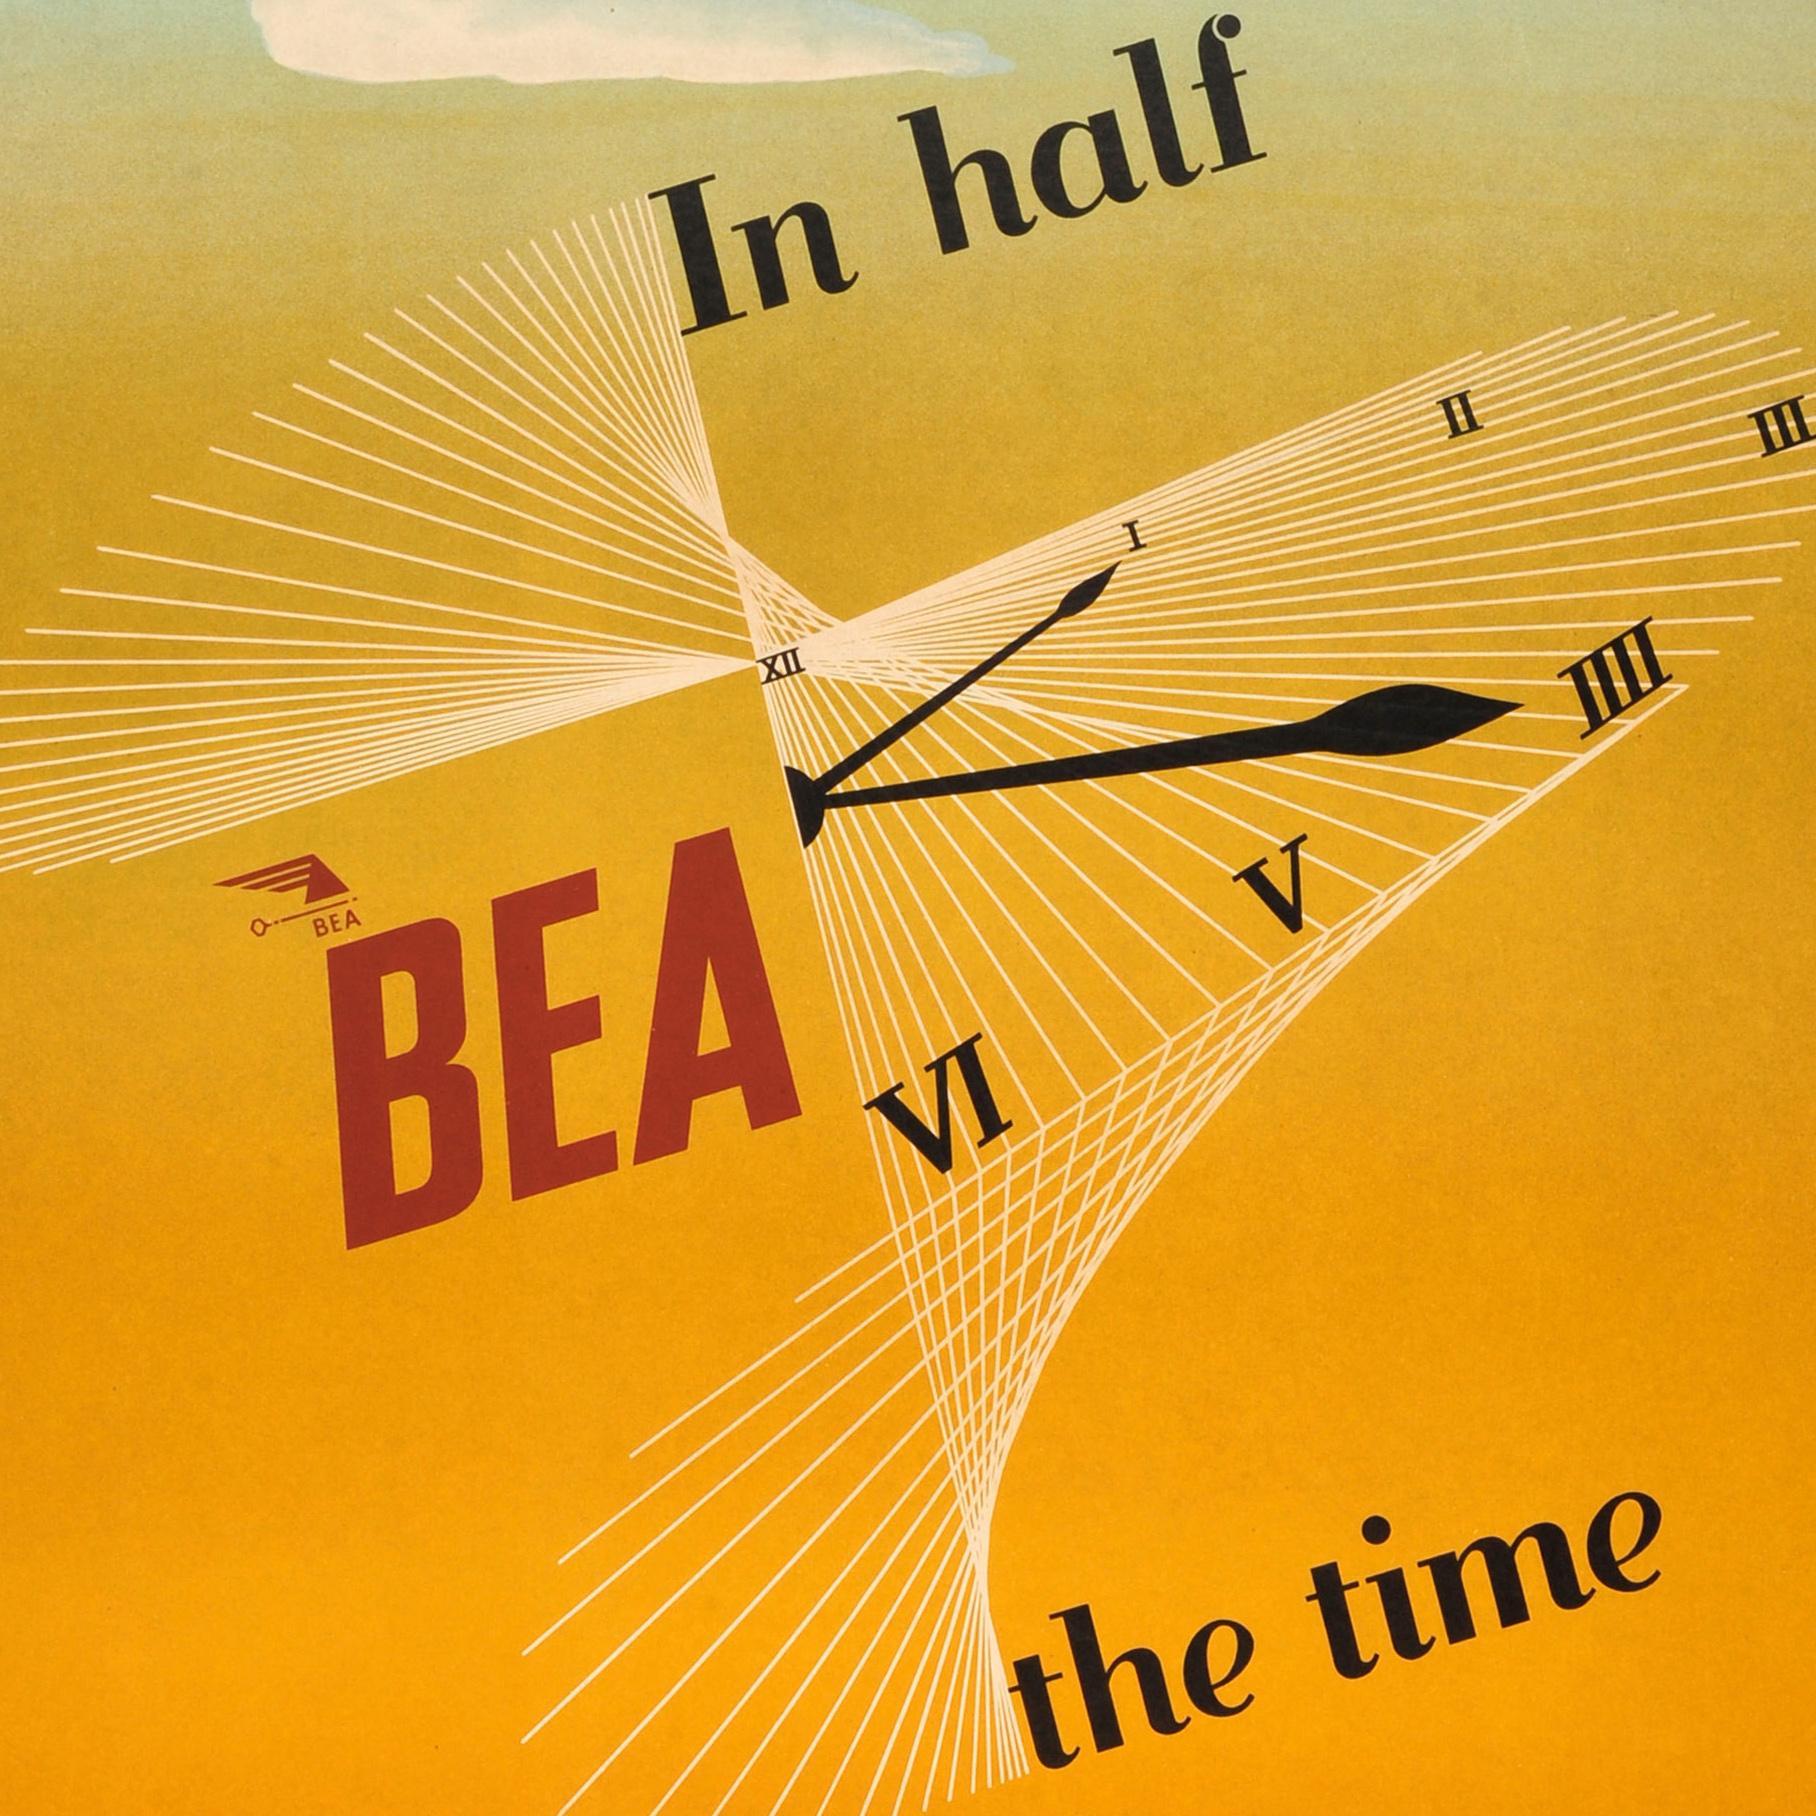 Original vintage travel advertising poster for British European Airways - Business Abroad In Half The Time BEA Takes You There And Brings You Back - featuring a colourful mid-century modern design against a sandy yellow background of a spiral shaped